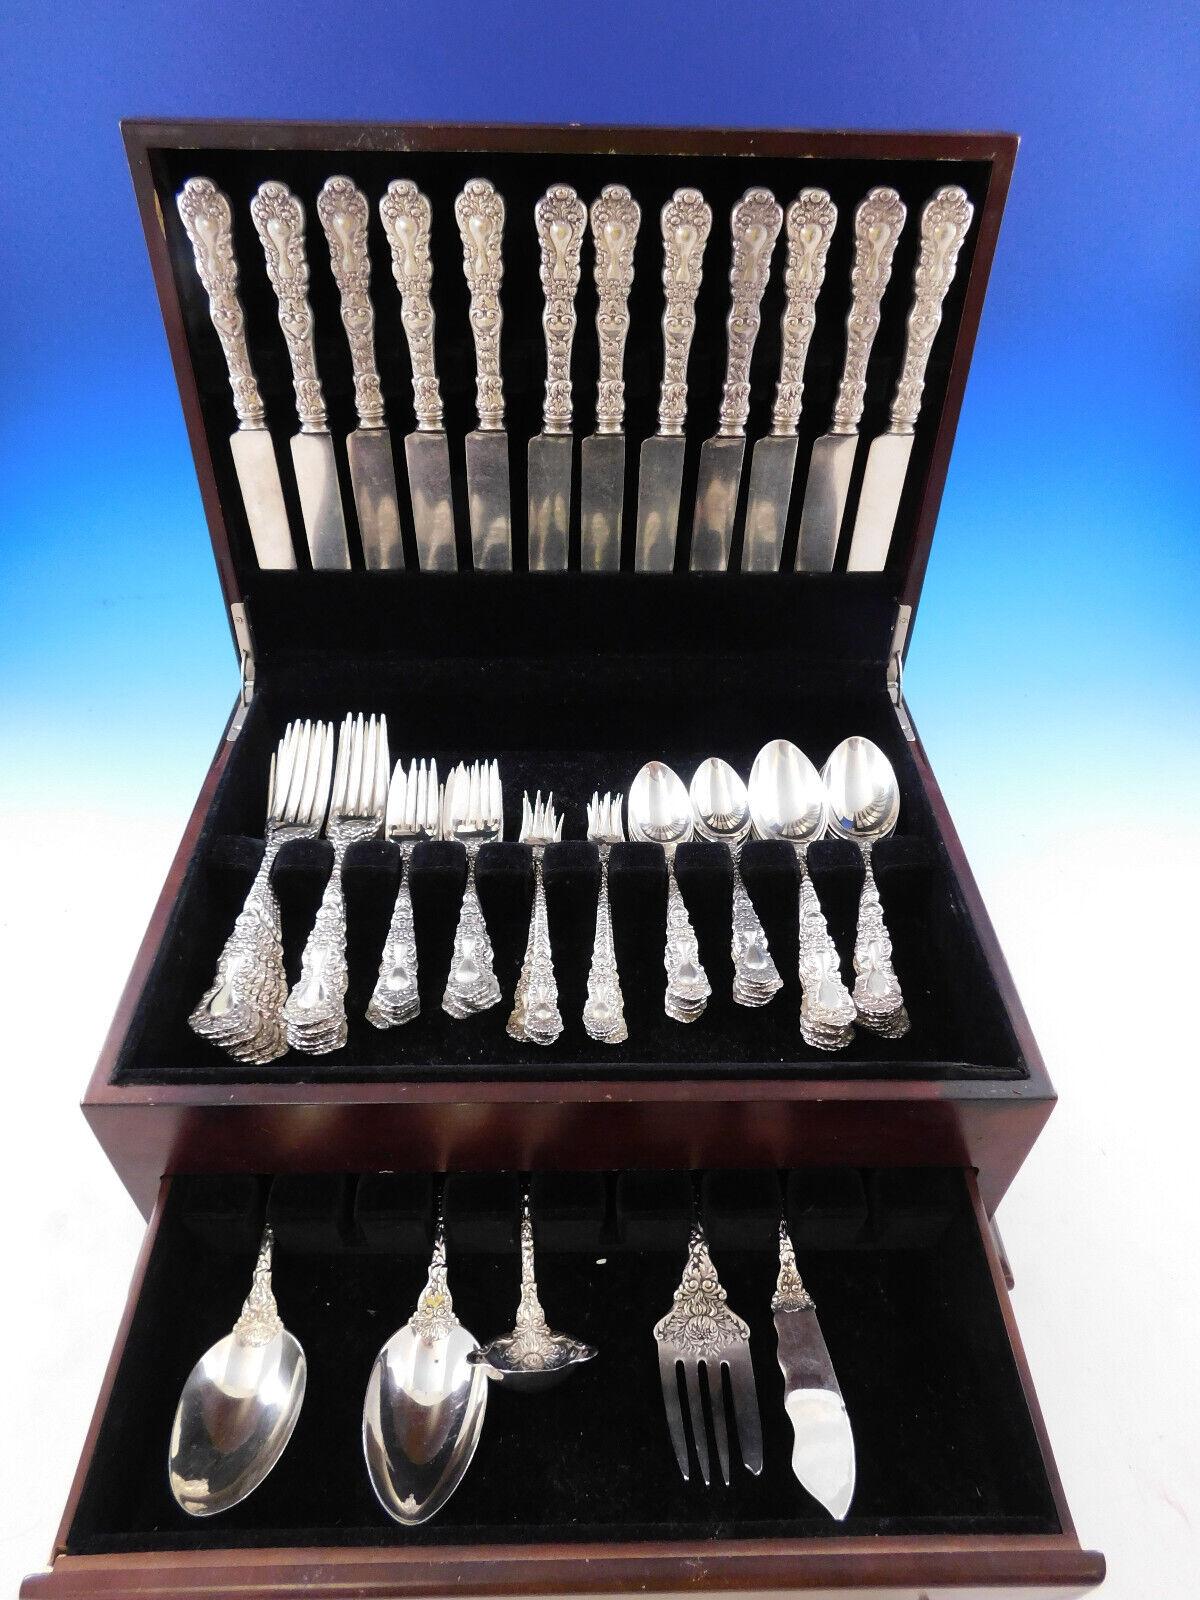 Dinner Size Imperial Chrysanthemum by Gorham sterling silver Flatware set, 67 pieces. This pattern was designed by William Codman for Gorham and was introduced in the year 1894. This pattern features gorgeous chrysanthemum detailing that extends